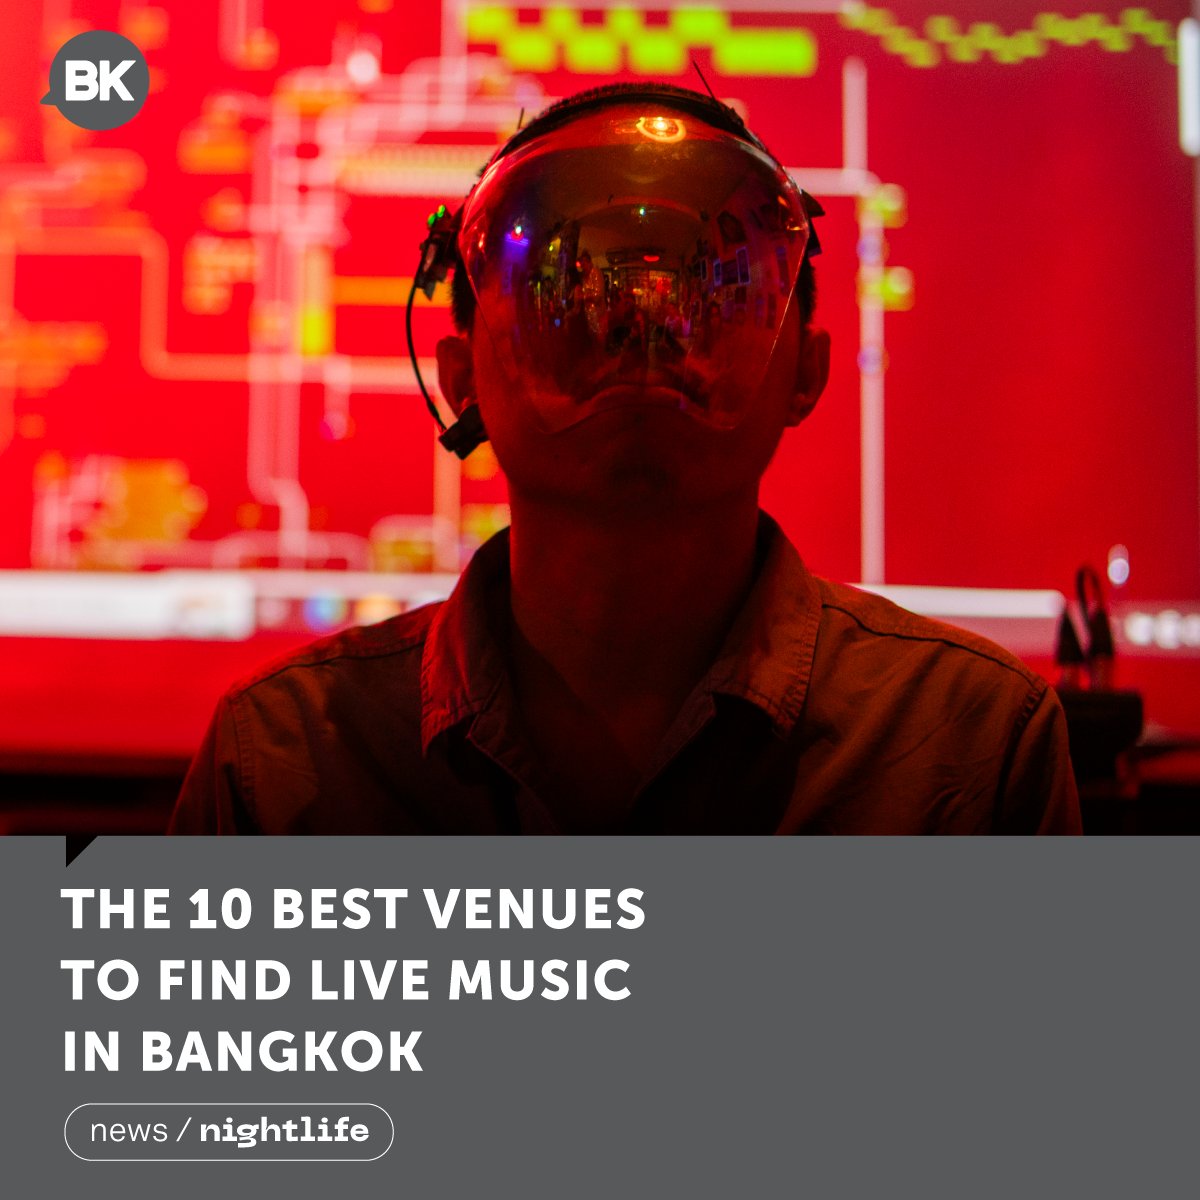 Bangkok's bands are born in dives, clubs, and bars in your neighborhood. bk.asia-city.com/nightlife/news…